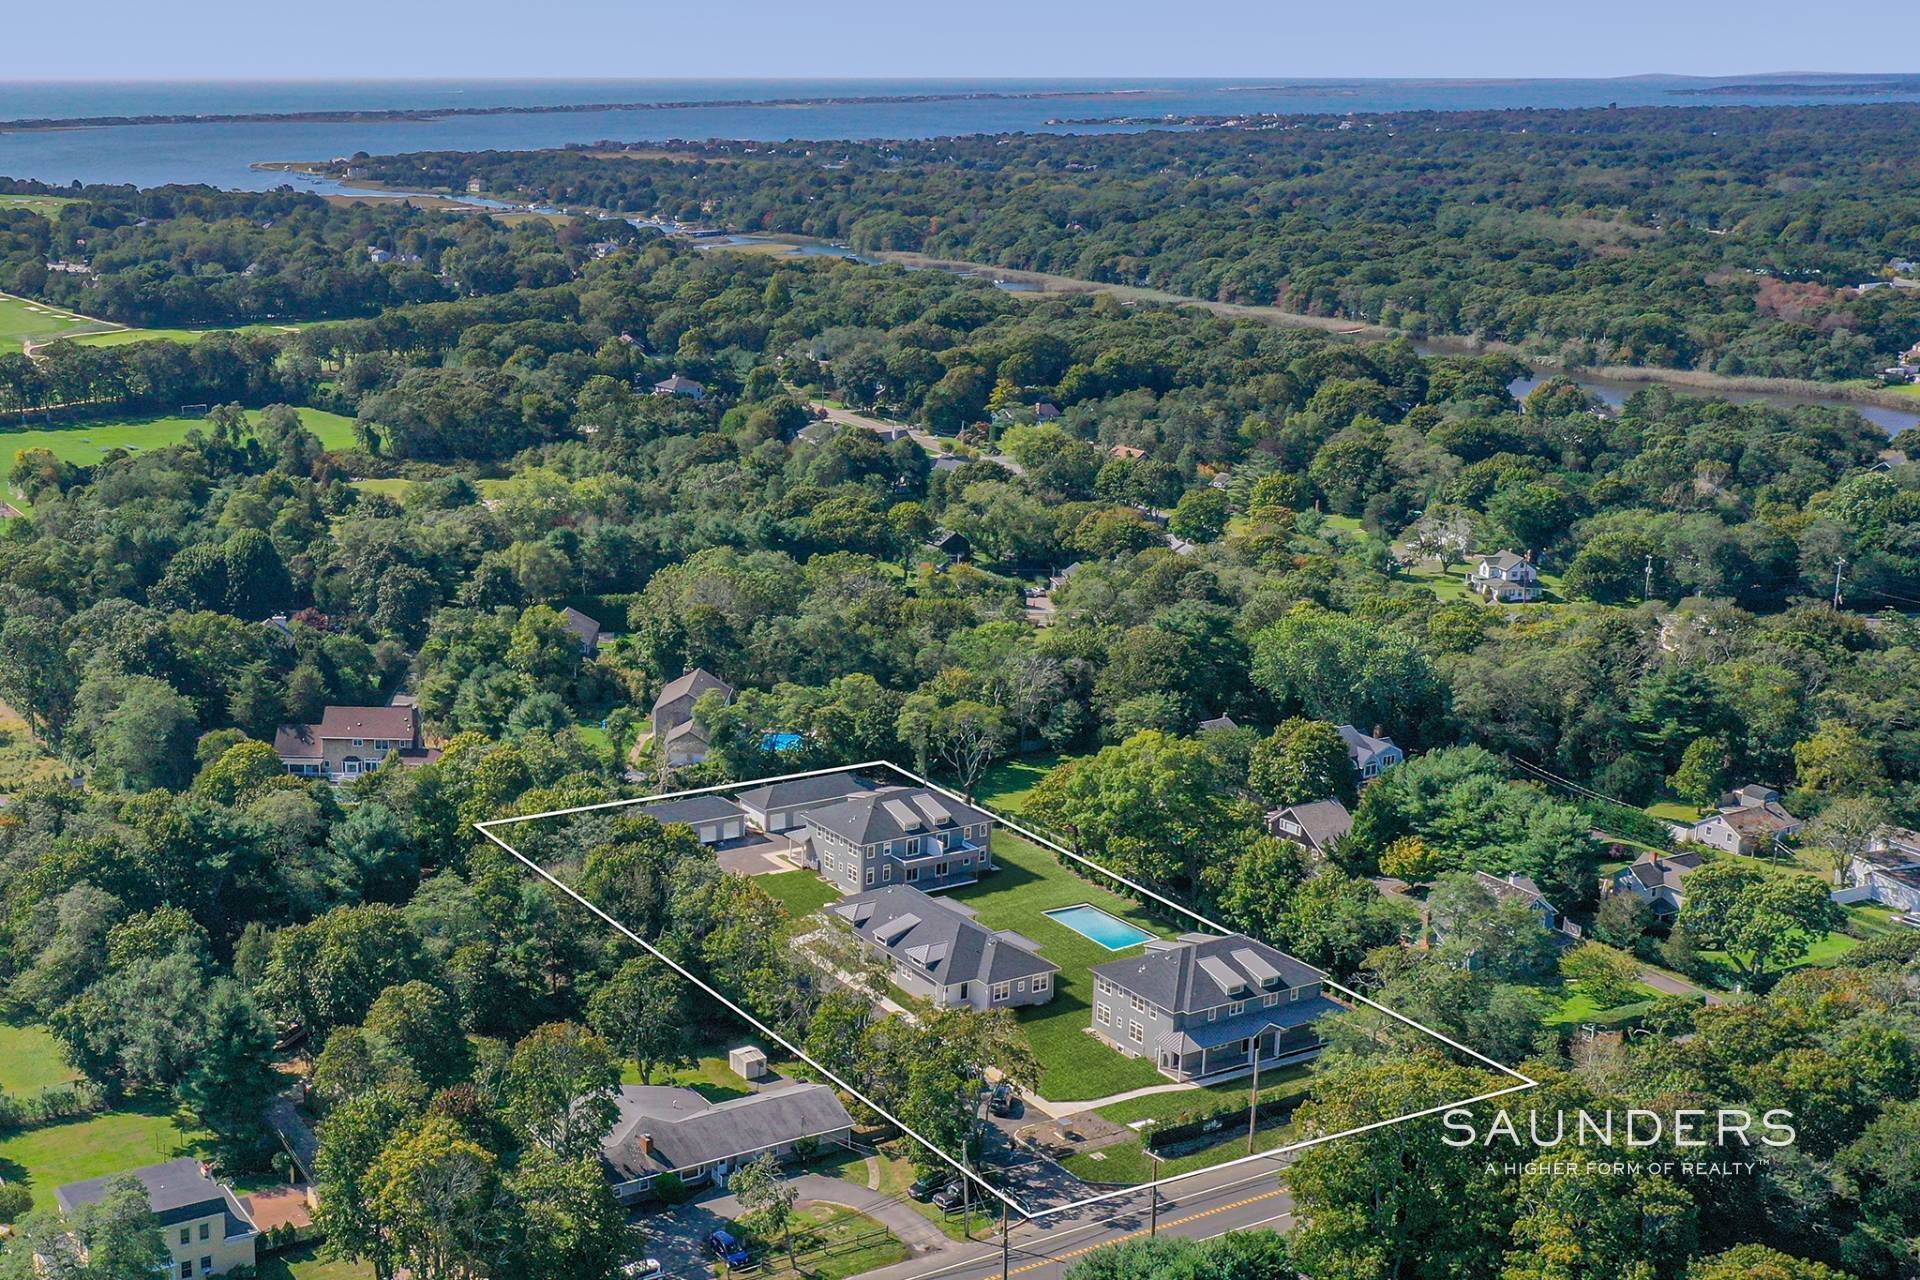 1. Townhouse for Sale at The Enclave - Westhampton 19 Montauk Highway, Unit 11, Westhampton, NY 11977